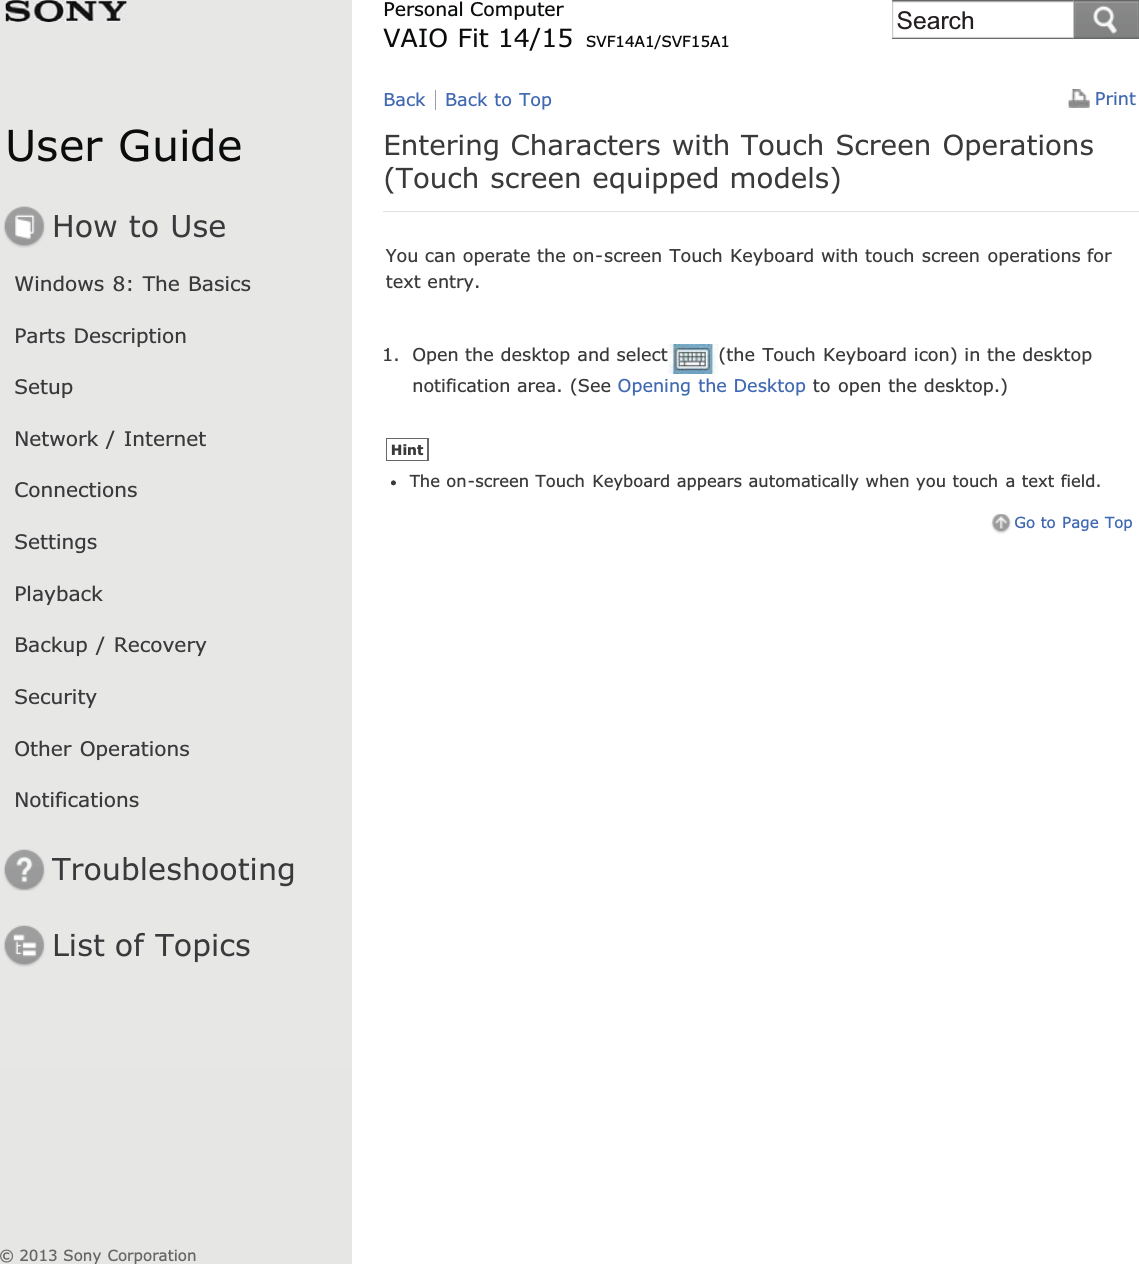 User GuideHow to UseWindows 8: The BasicsParts DescriptionSetupNetwork / InternetConnectionsSettingsPlaybackBackup / RecoverySecurityOther OperationsNotificationsTroubleshootingList of TopicsPrintPersonal ComputerVAIO Fit 14/15 SVF14A1/SVF15A1Entering Characters with Touch Screen Operations(Touch screen equipped models)You can operate the on-screen Touch Keyboard with touch screen operations fortext entry.1. Open the desktop and select (the Touch Keyboard icon) in the desktopnotification area. (See Opening the Desktop to open the desktop.)HintThe on-screen Touch Keyboard appears automatically when you touch a text field.Go to Page TopBack Back to Top© 2013 Sony CorporationSearch